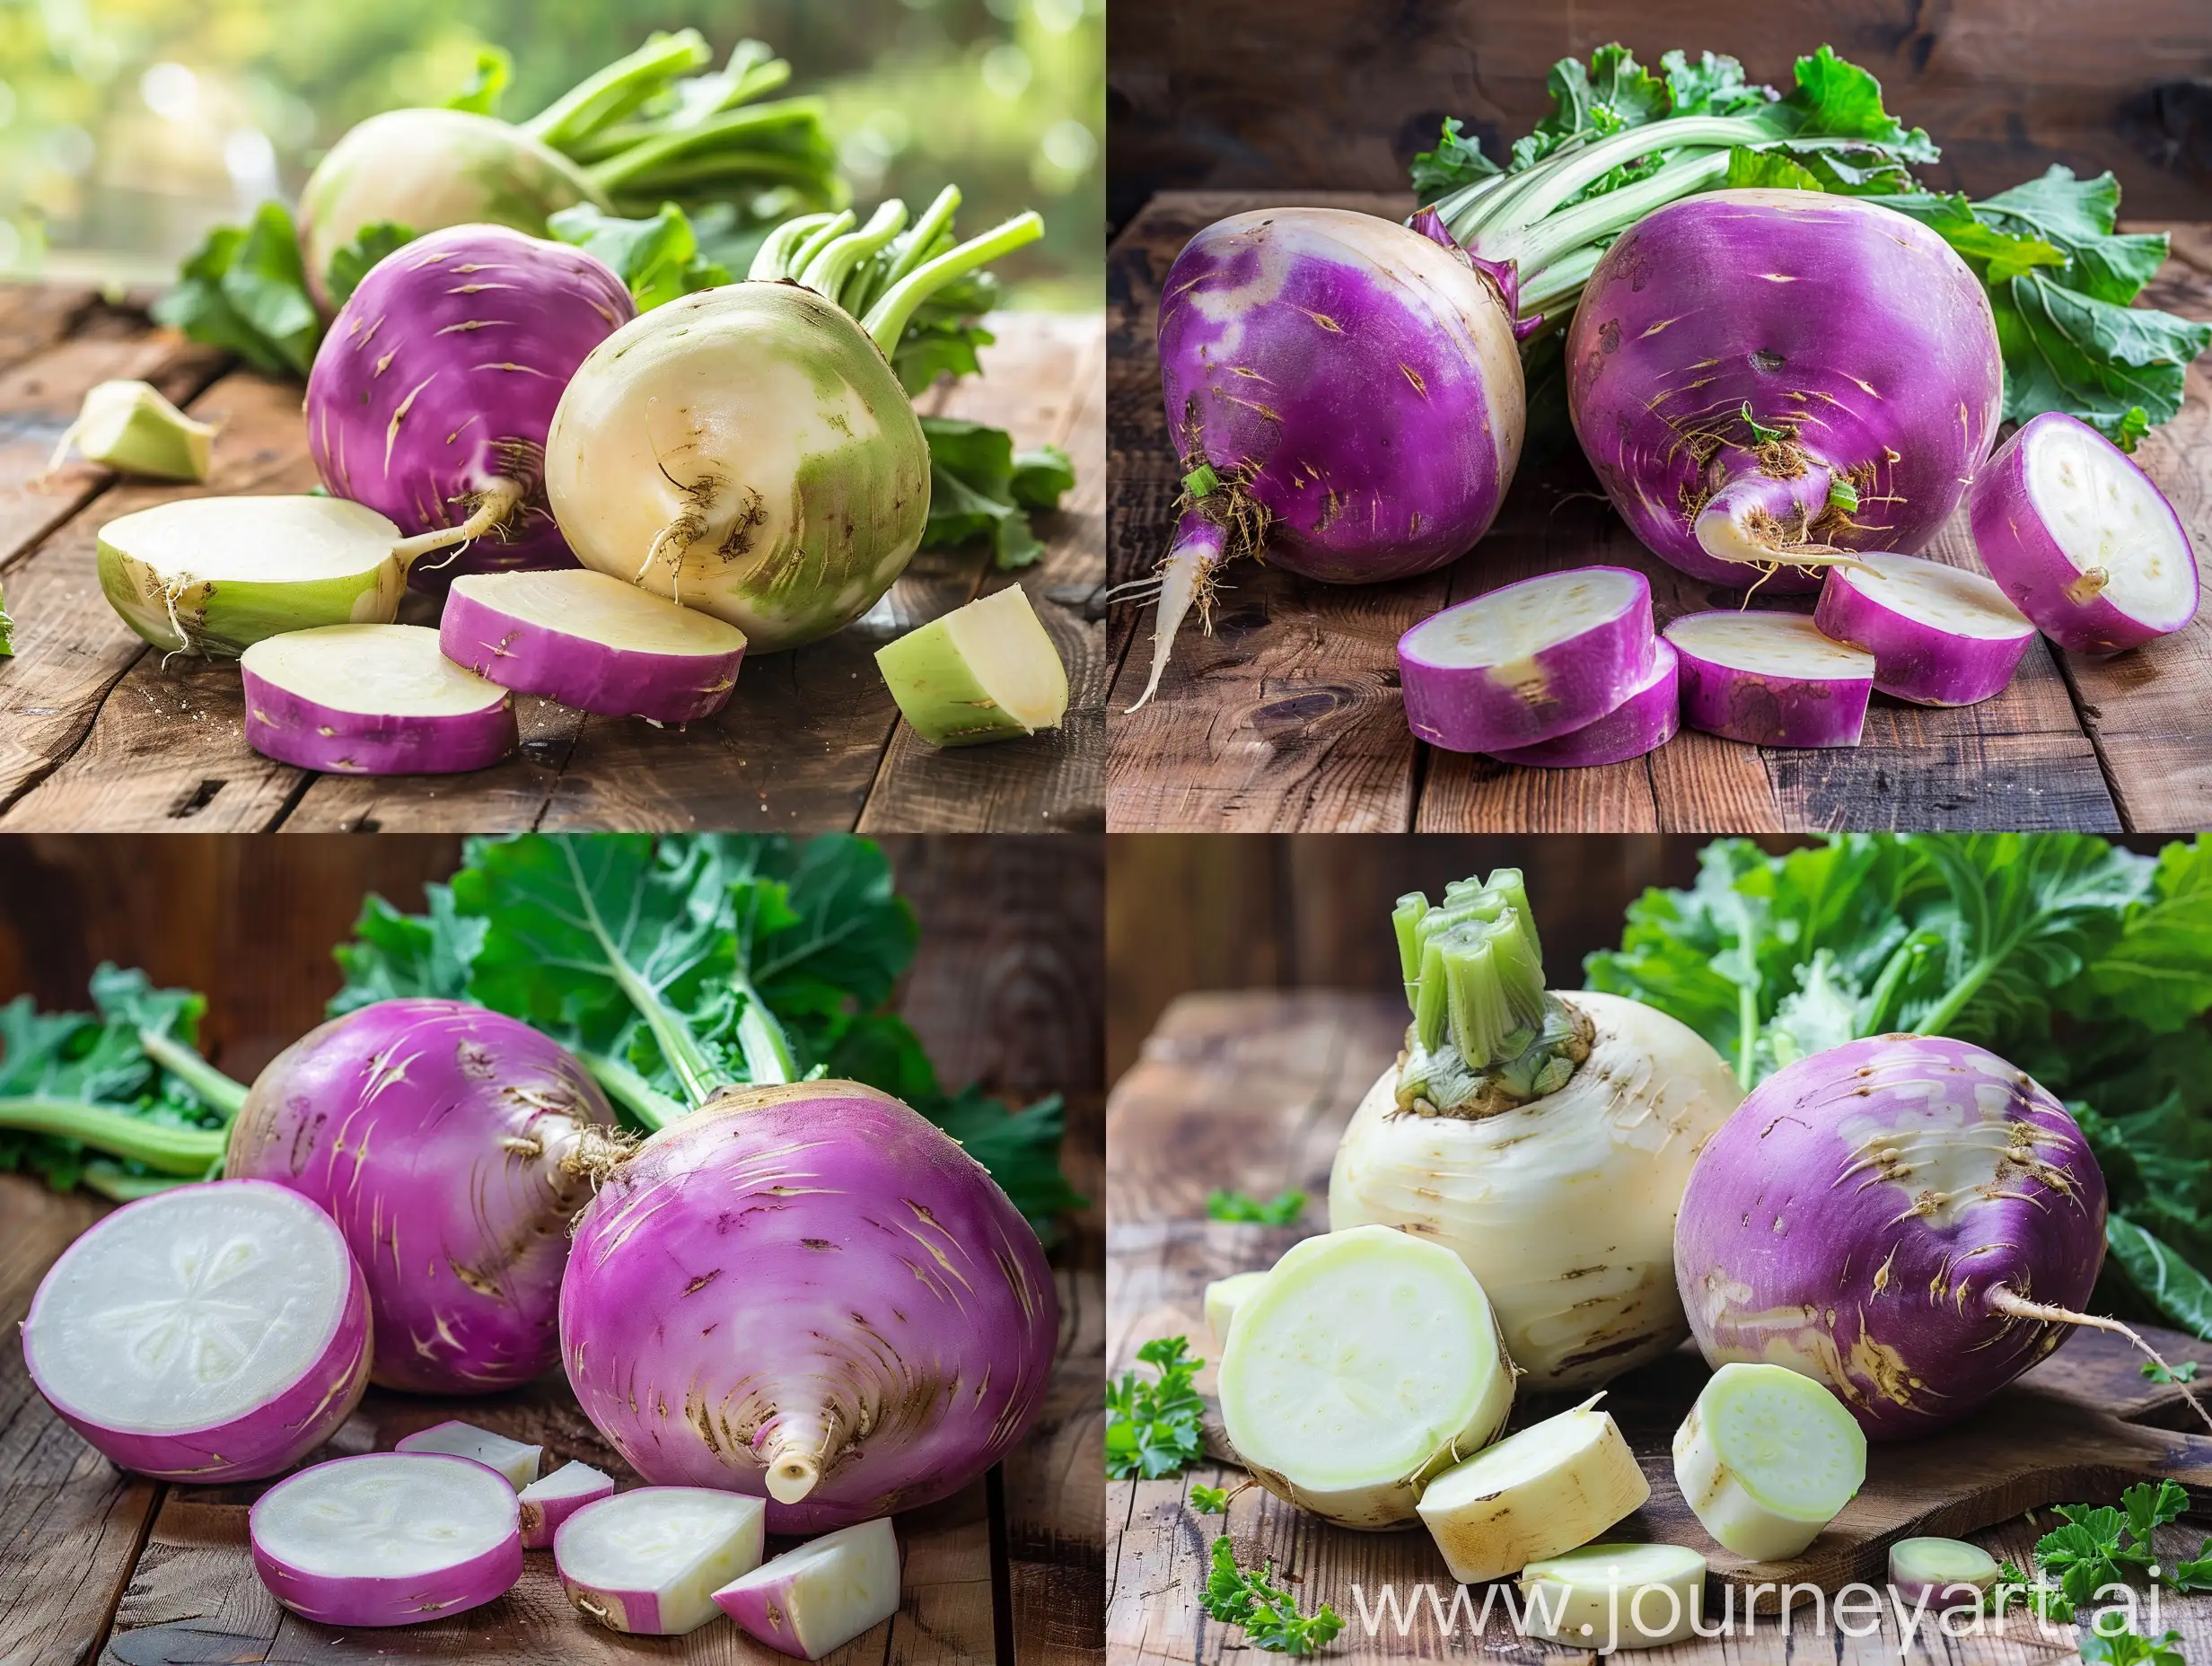 Real photo of turnip with cut pieces on wooden table with beautiful background